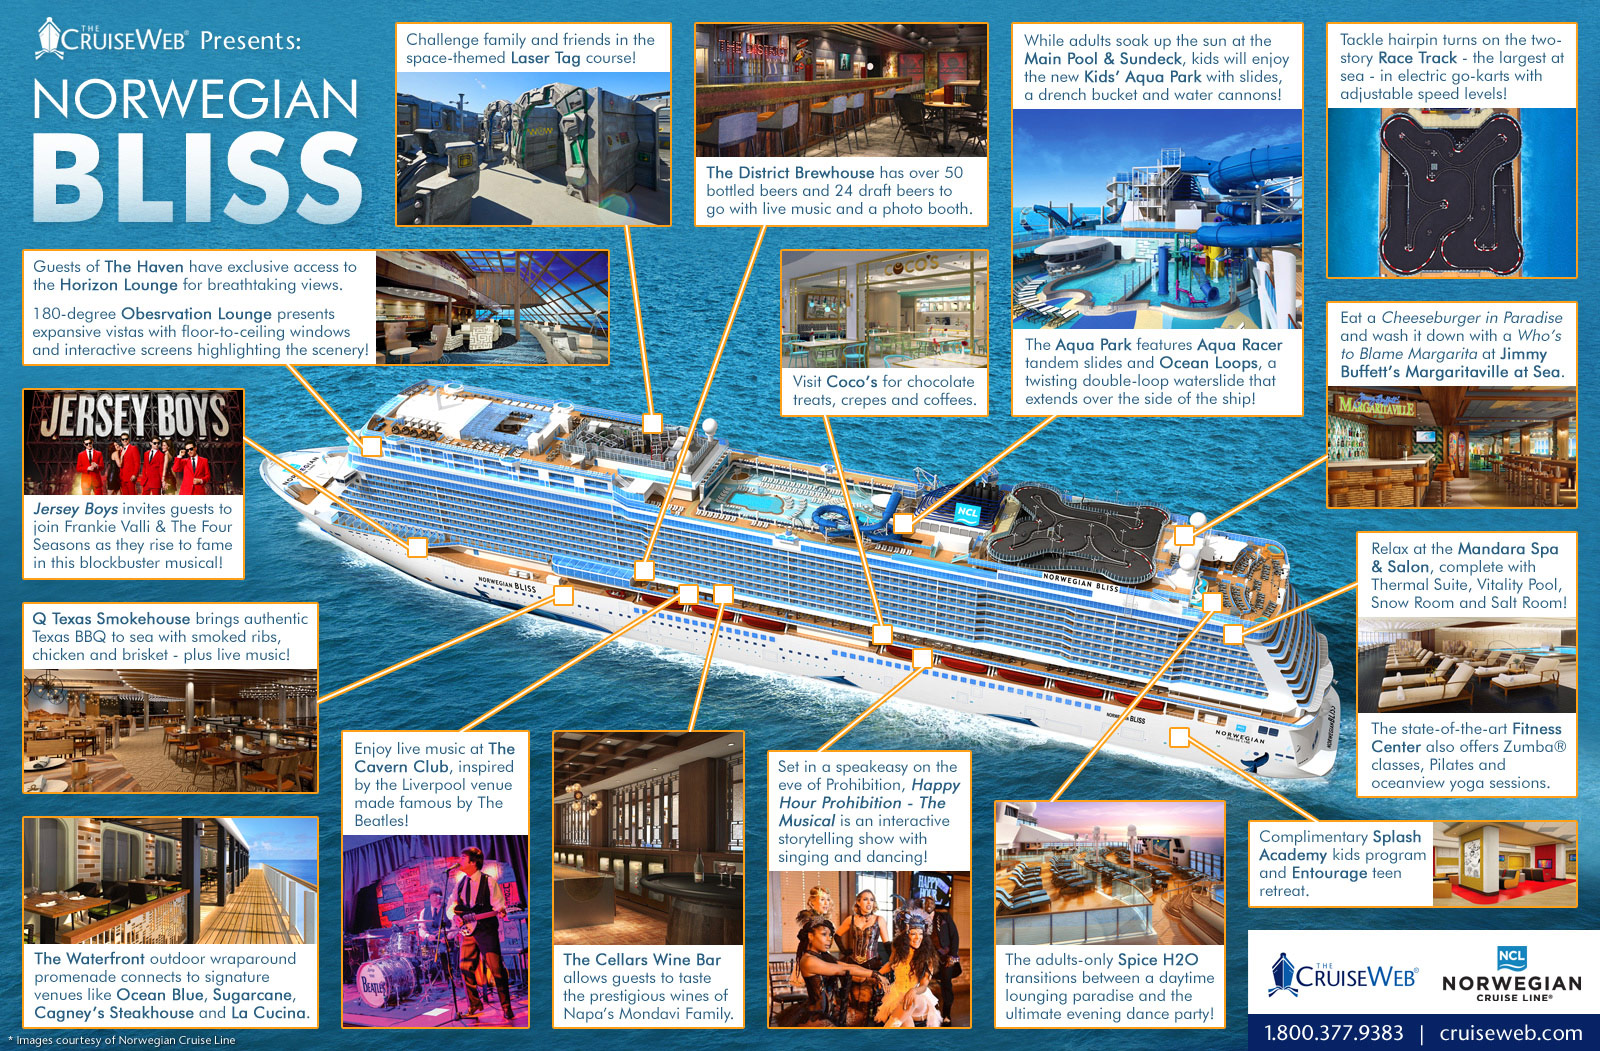 ncl bliss cruise schedule